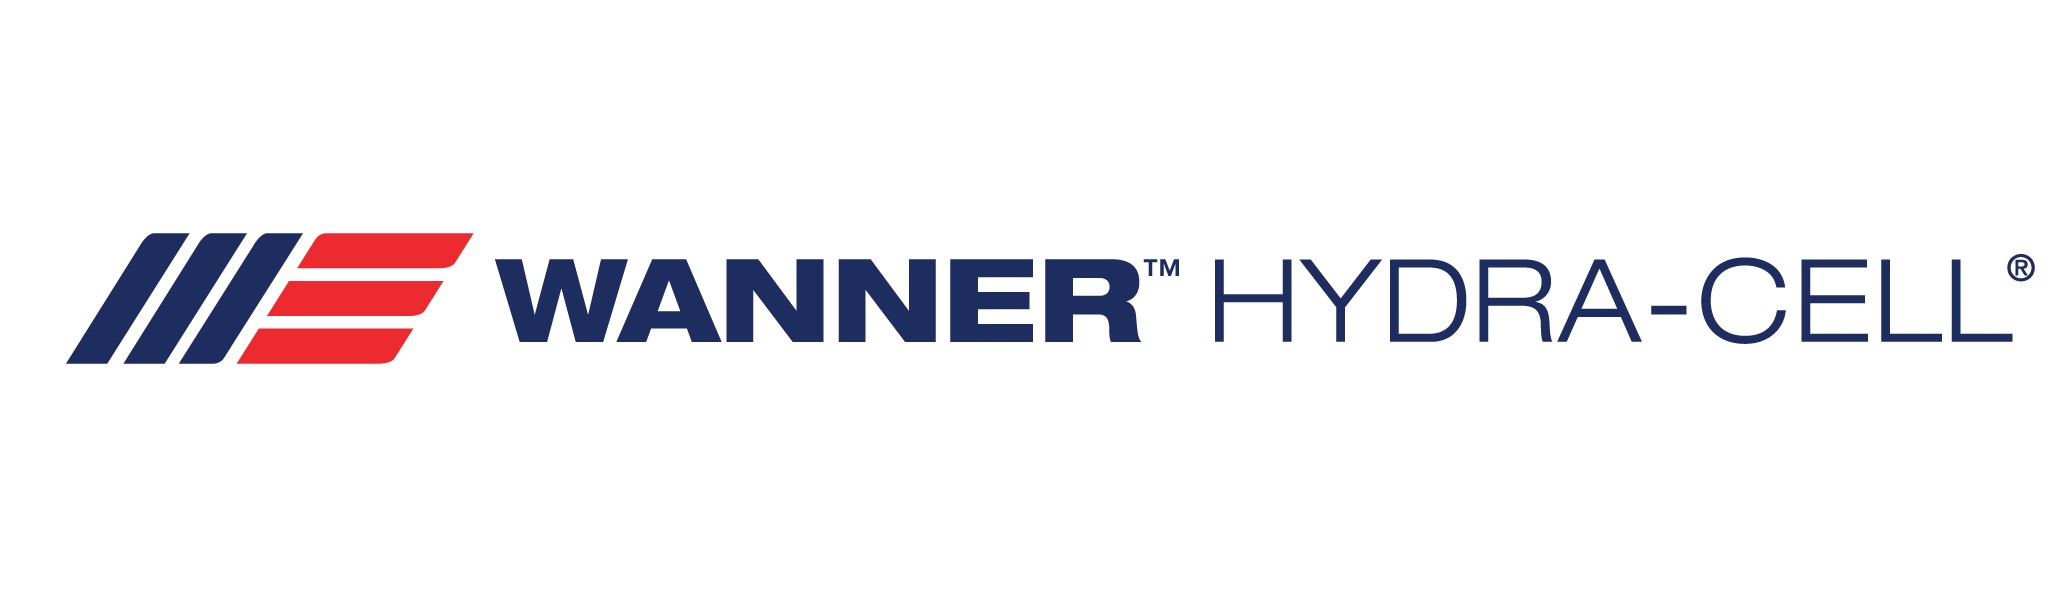 Wanner Hydra-Cell Pumps – HydraCell high pressure, hydraulically actuated diaphragm pumps in cast iron, bronze, 316SS, Hastelloy & non-metallic construction.